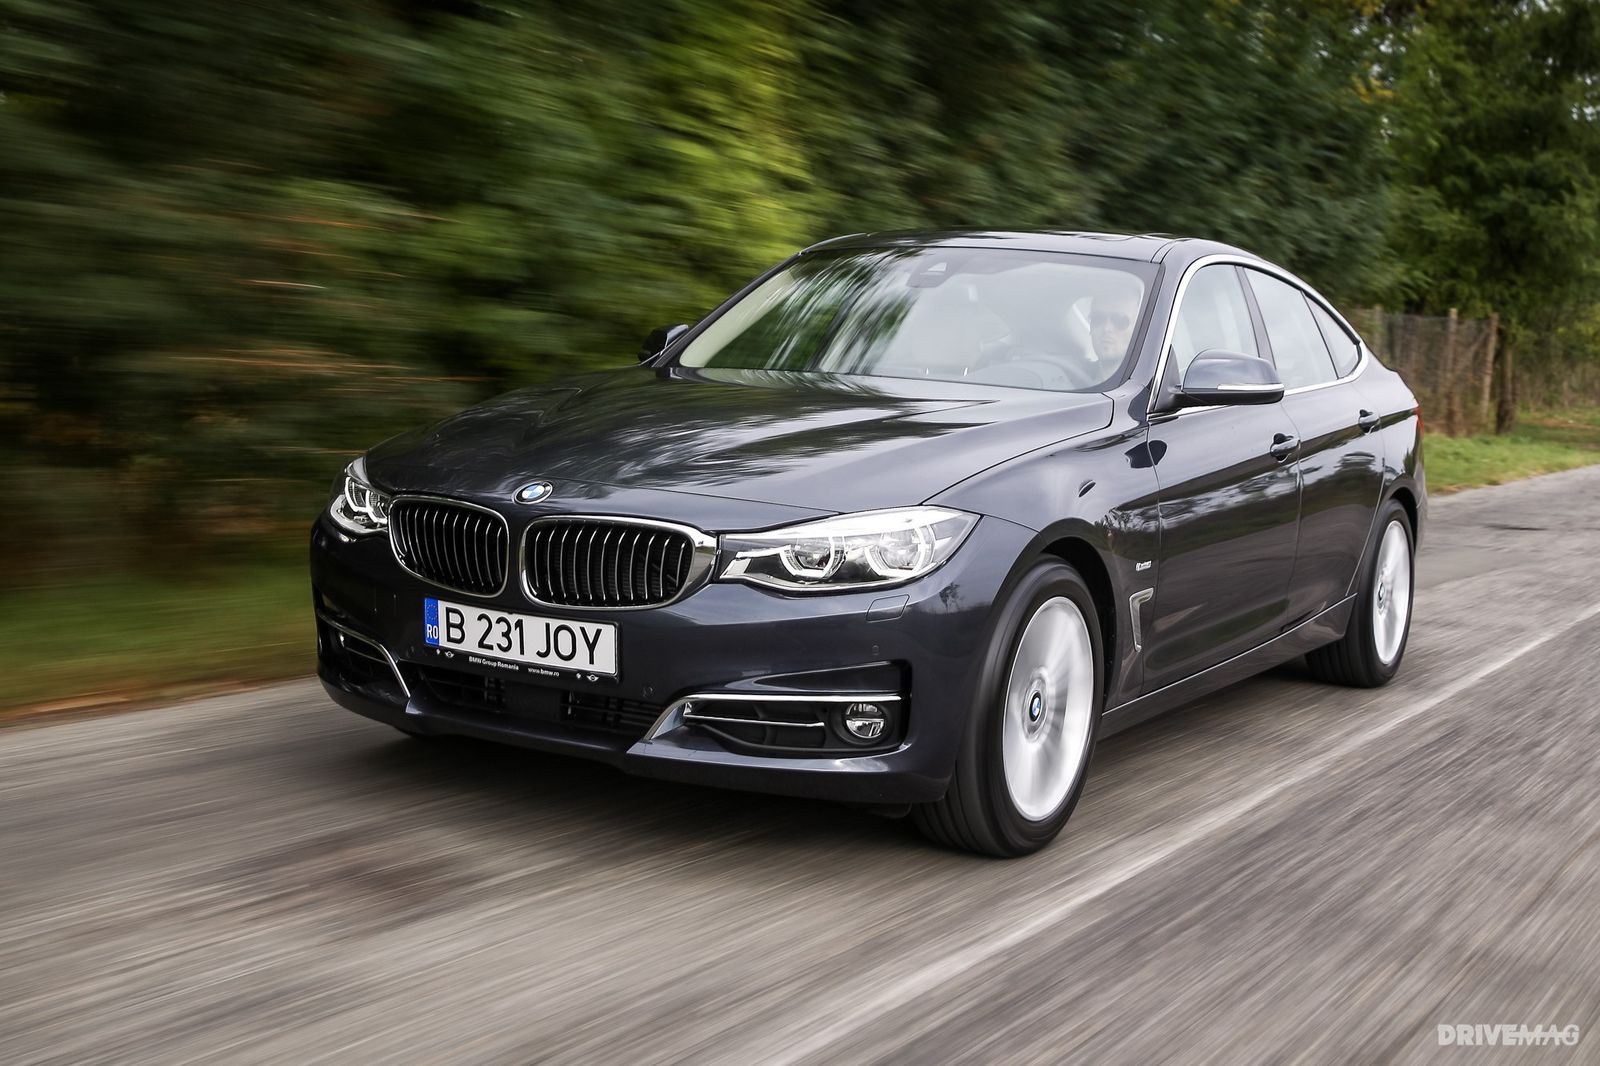 2017 BMW 320d GT Luxury Line Test Drive: Think Outside the Box | DriveMag  Cars